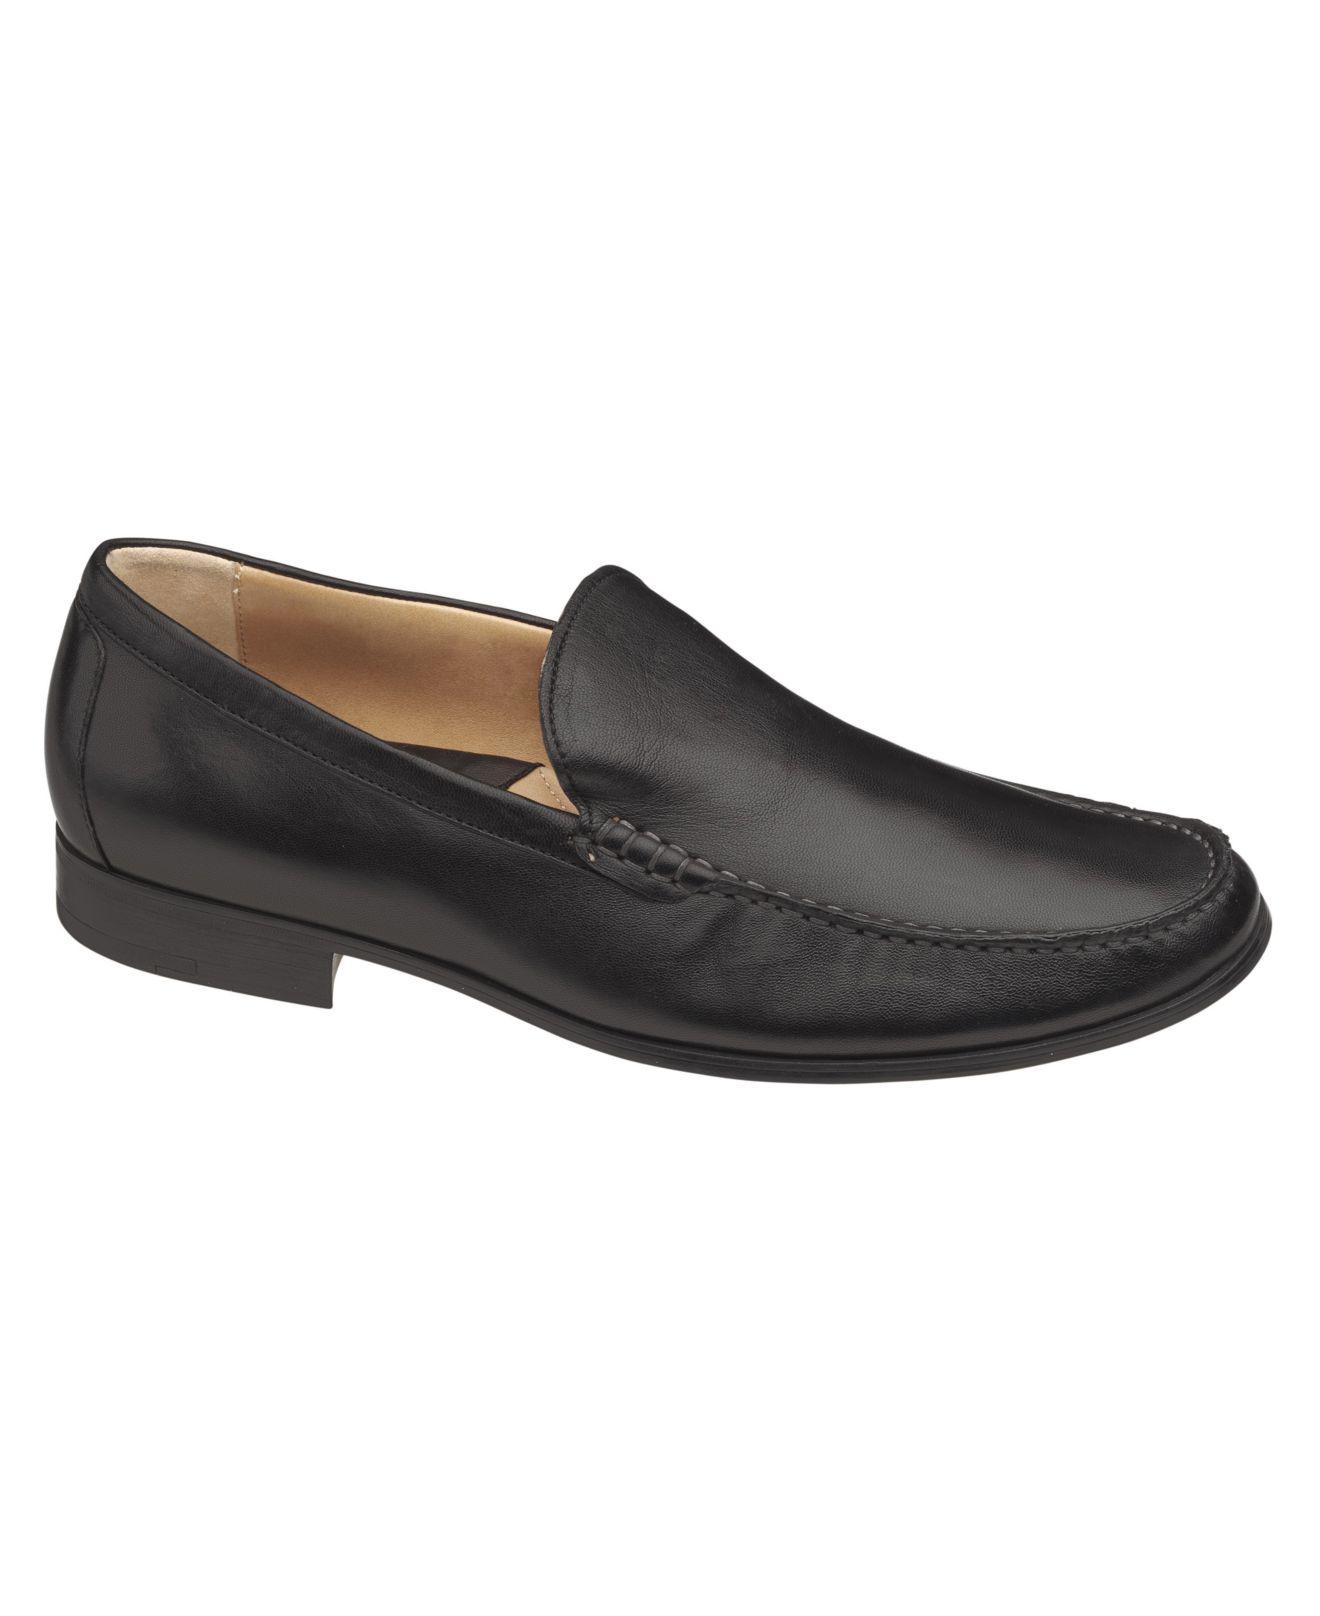 Johnston & Murphy Leather Shoes, Cresswell Venetian Loafer in Black for ...